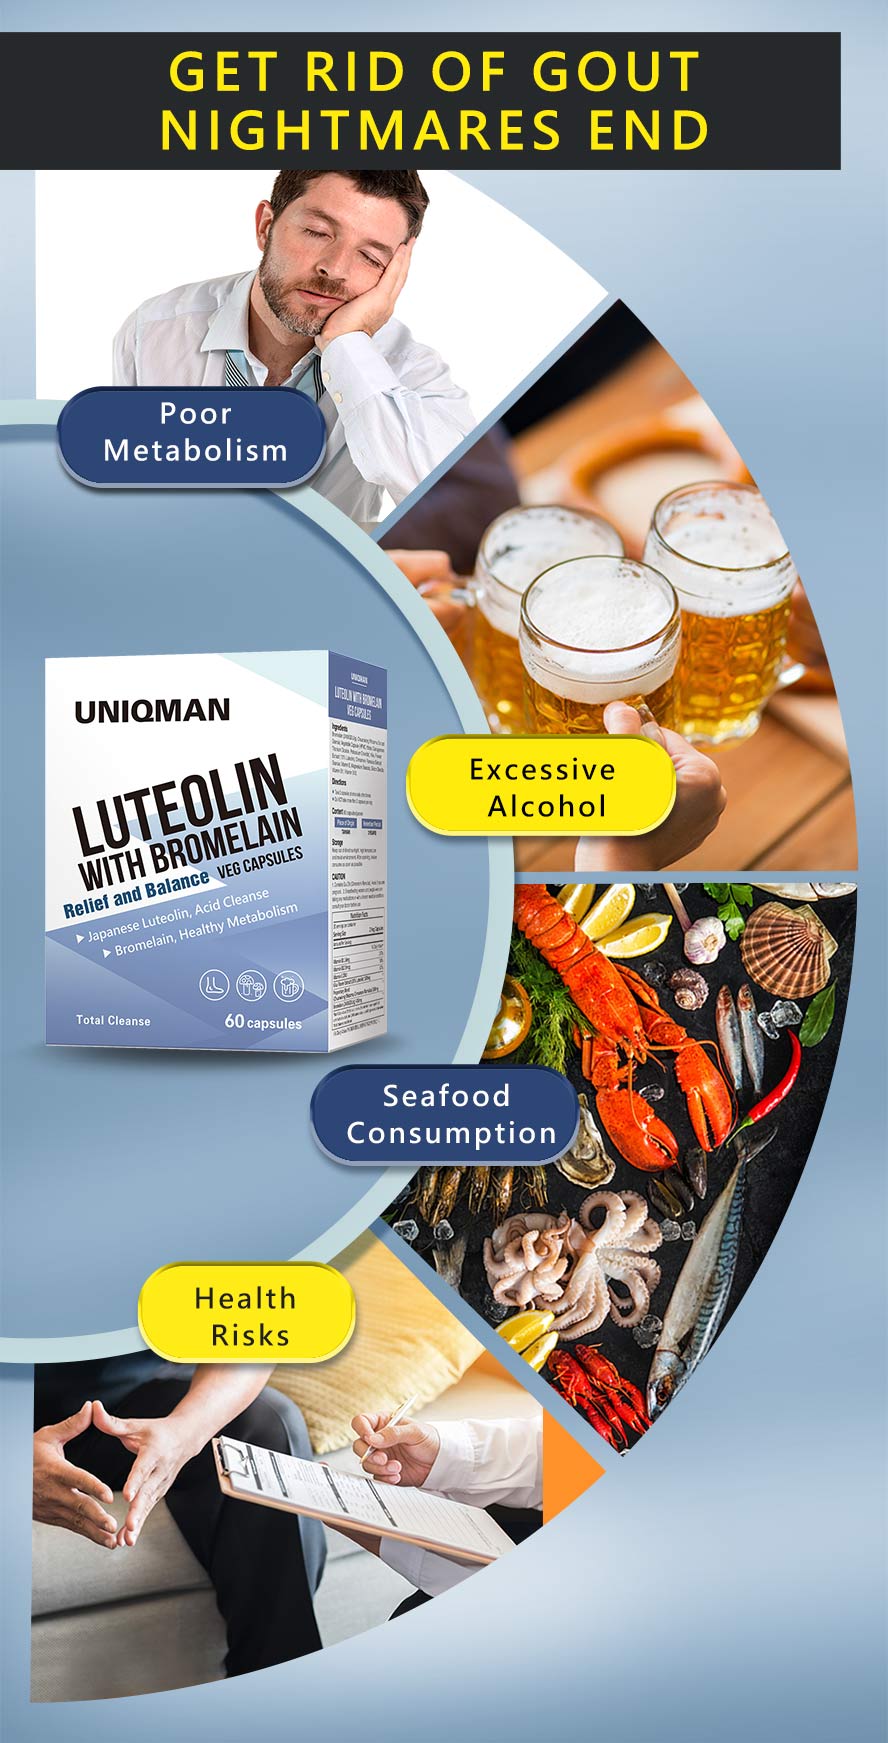 No worries with excessive purine-rich food intake after taking Luteolin with Bromelain Veg Capsules